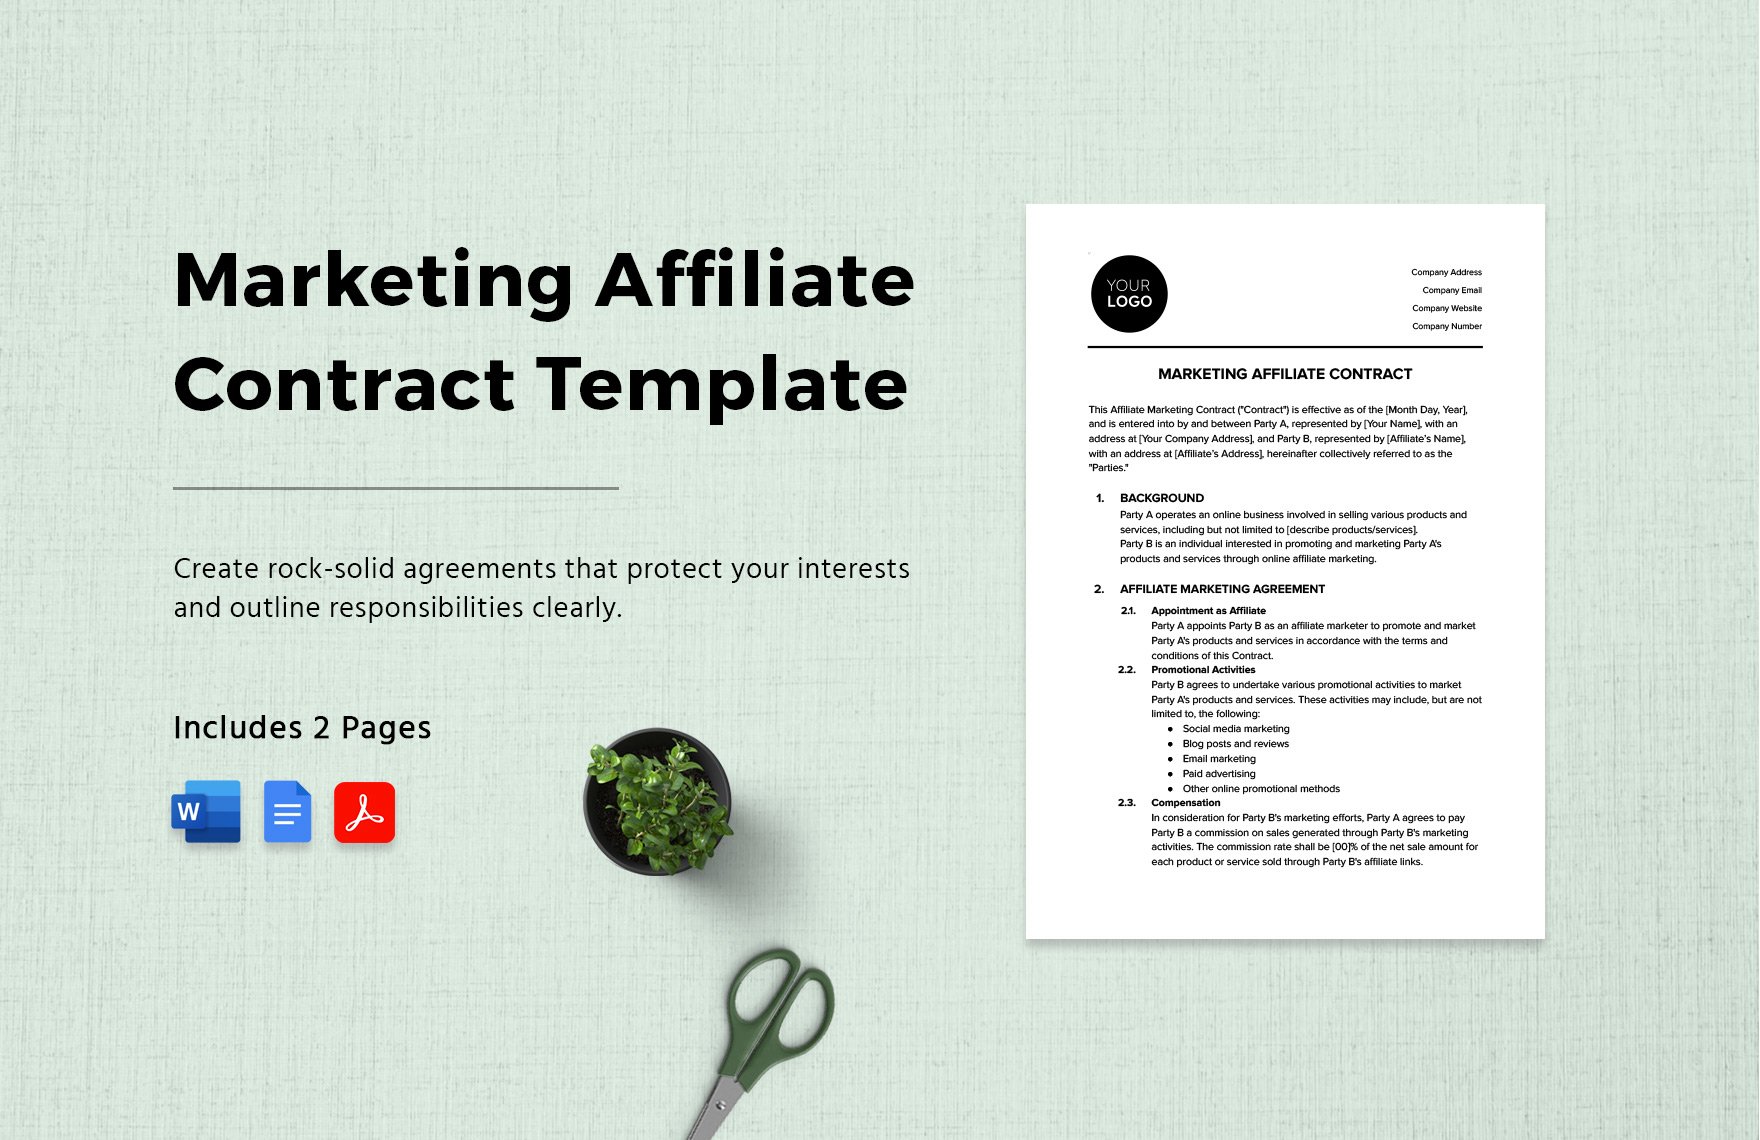 Marketing Affiliate Contract Template in Word, Google Docs, PDF